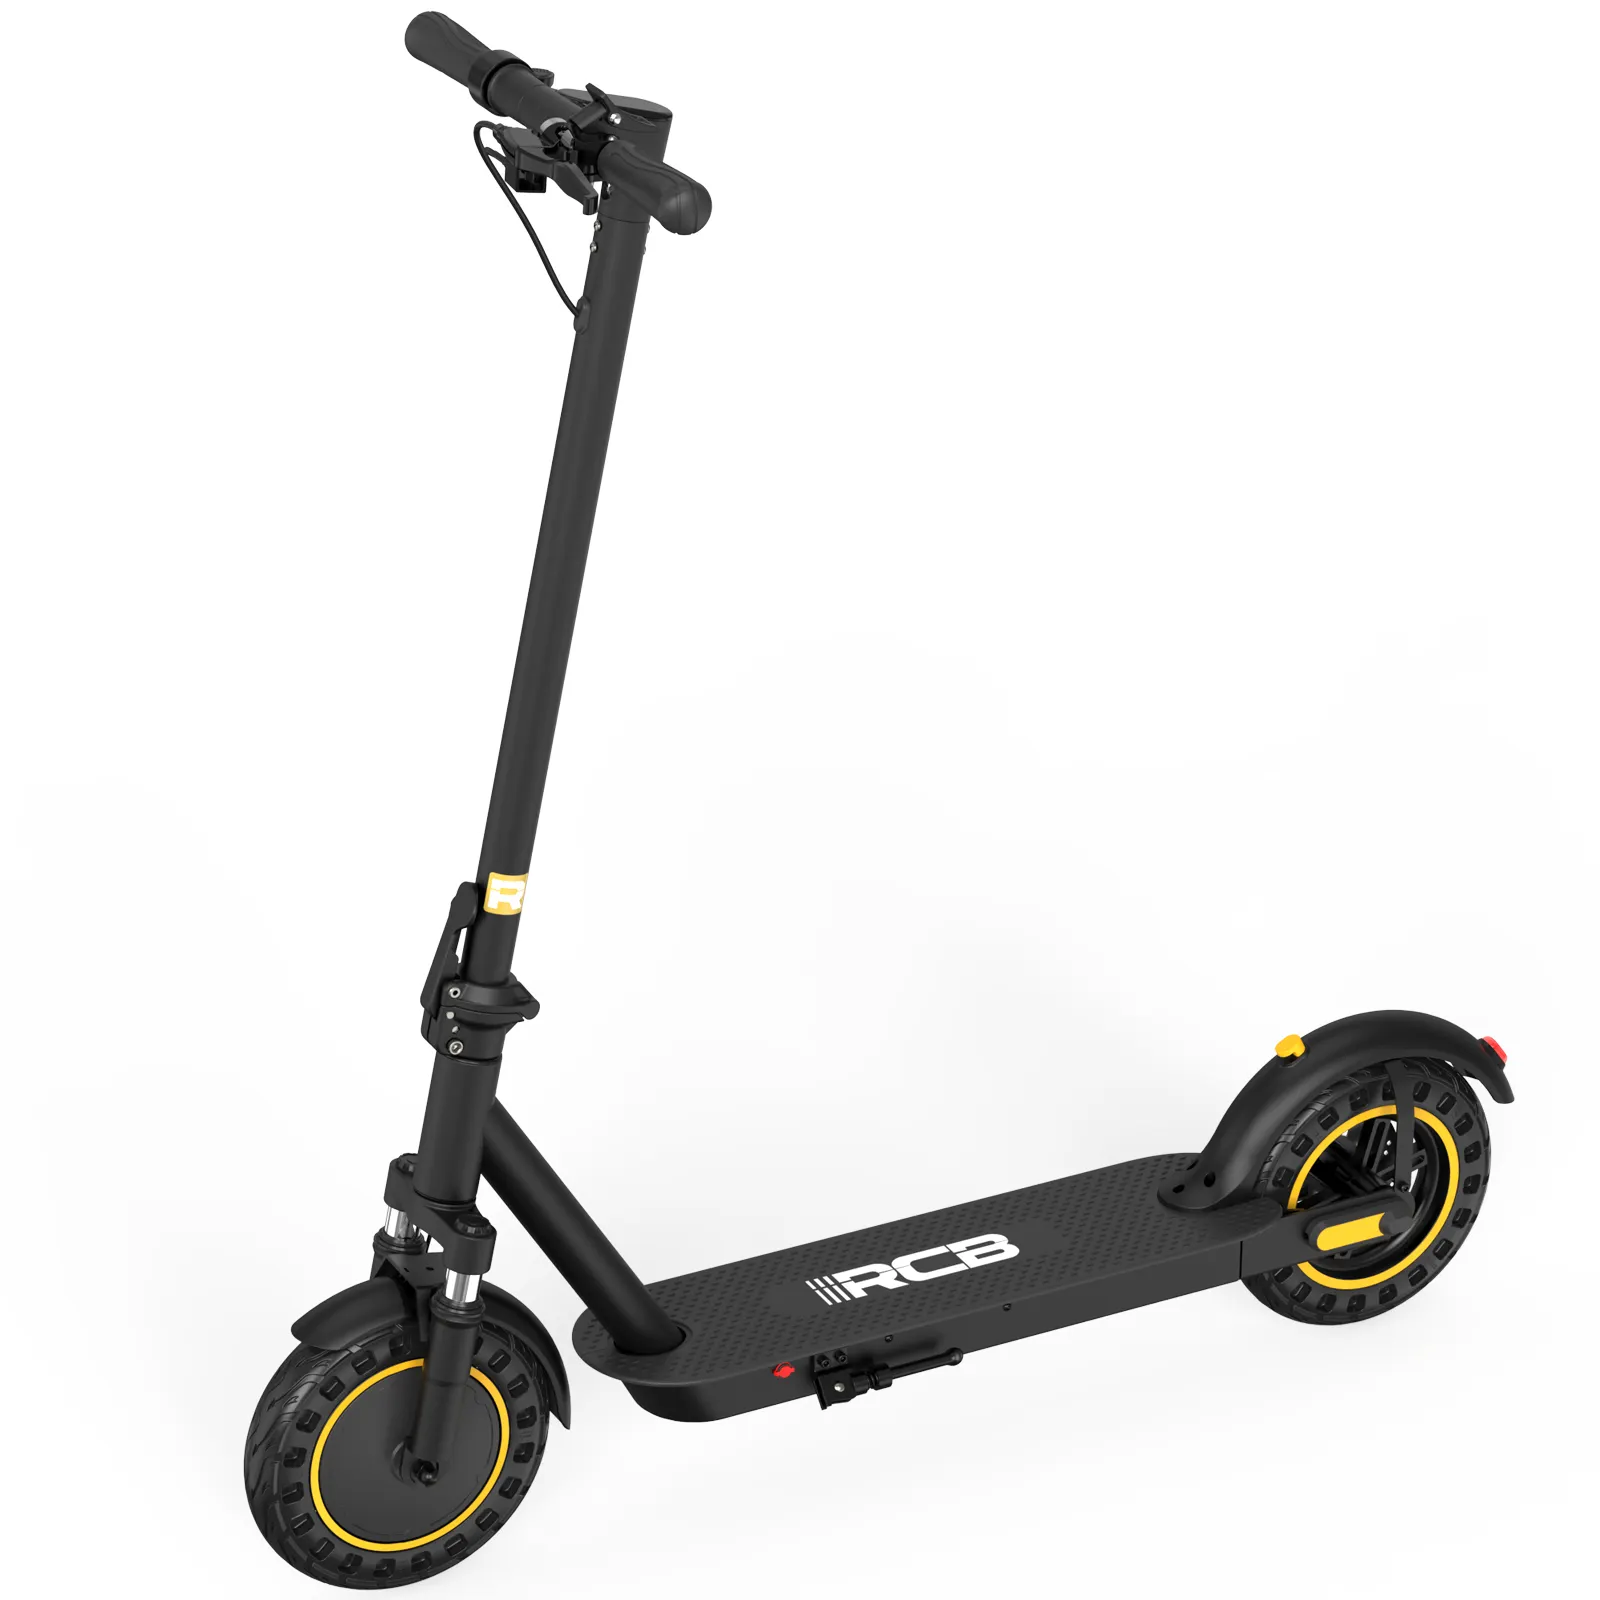 RCB EU Warehouse Stock 500W 42V Electronic Scooter Adult Two Wheels 3 Gears Folding Electric Scooters